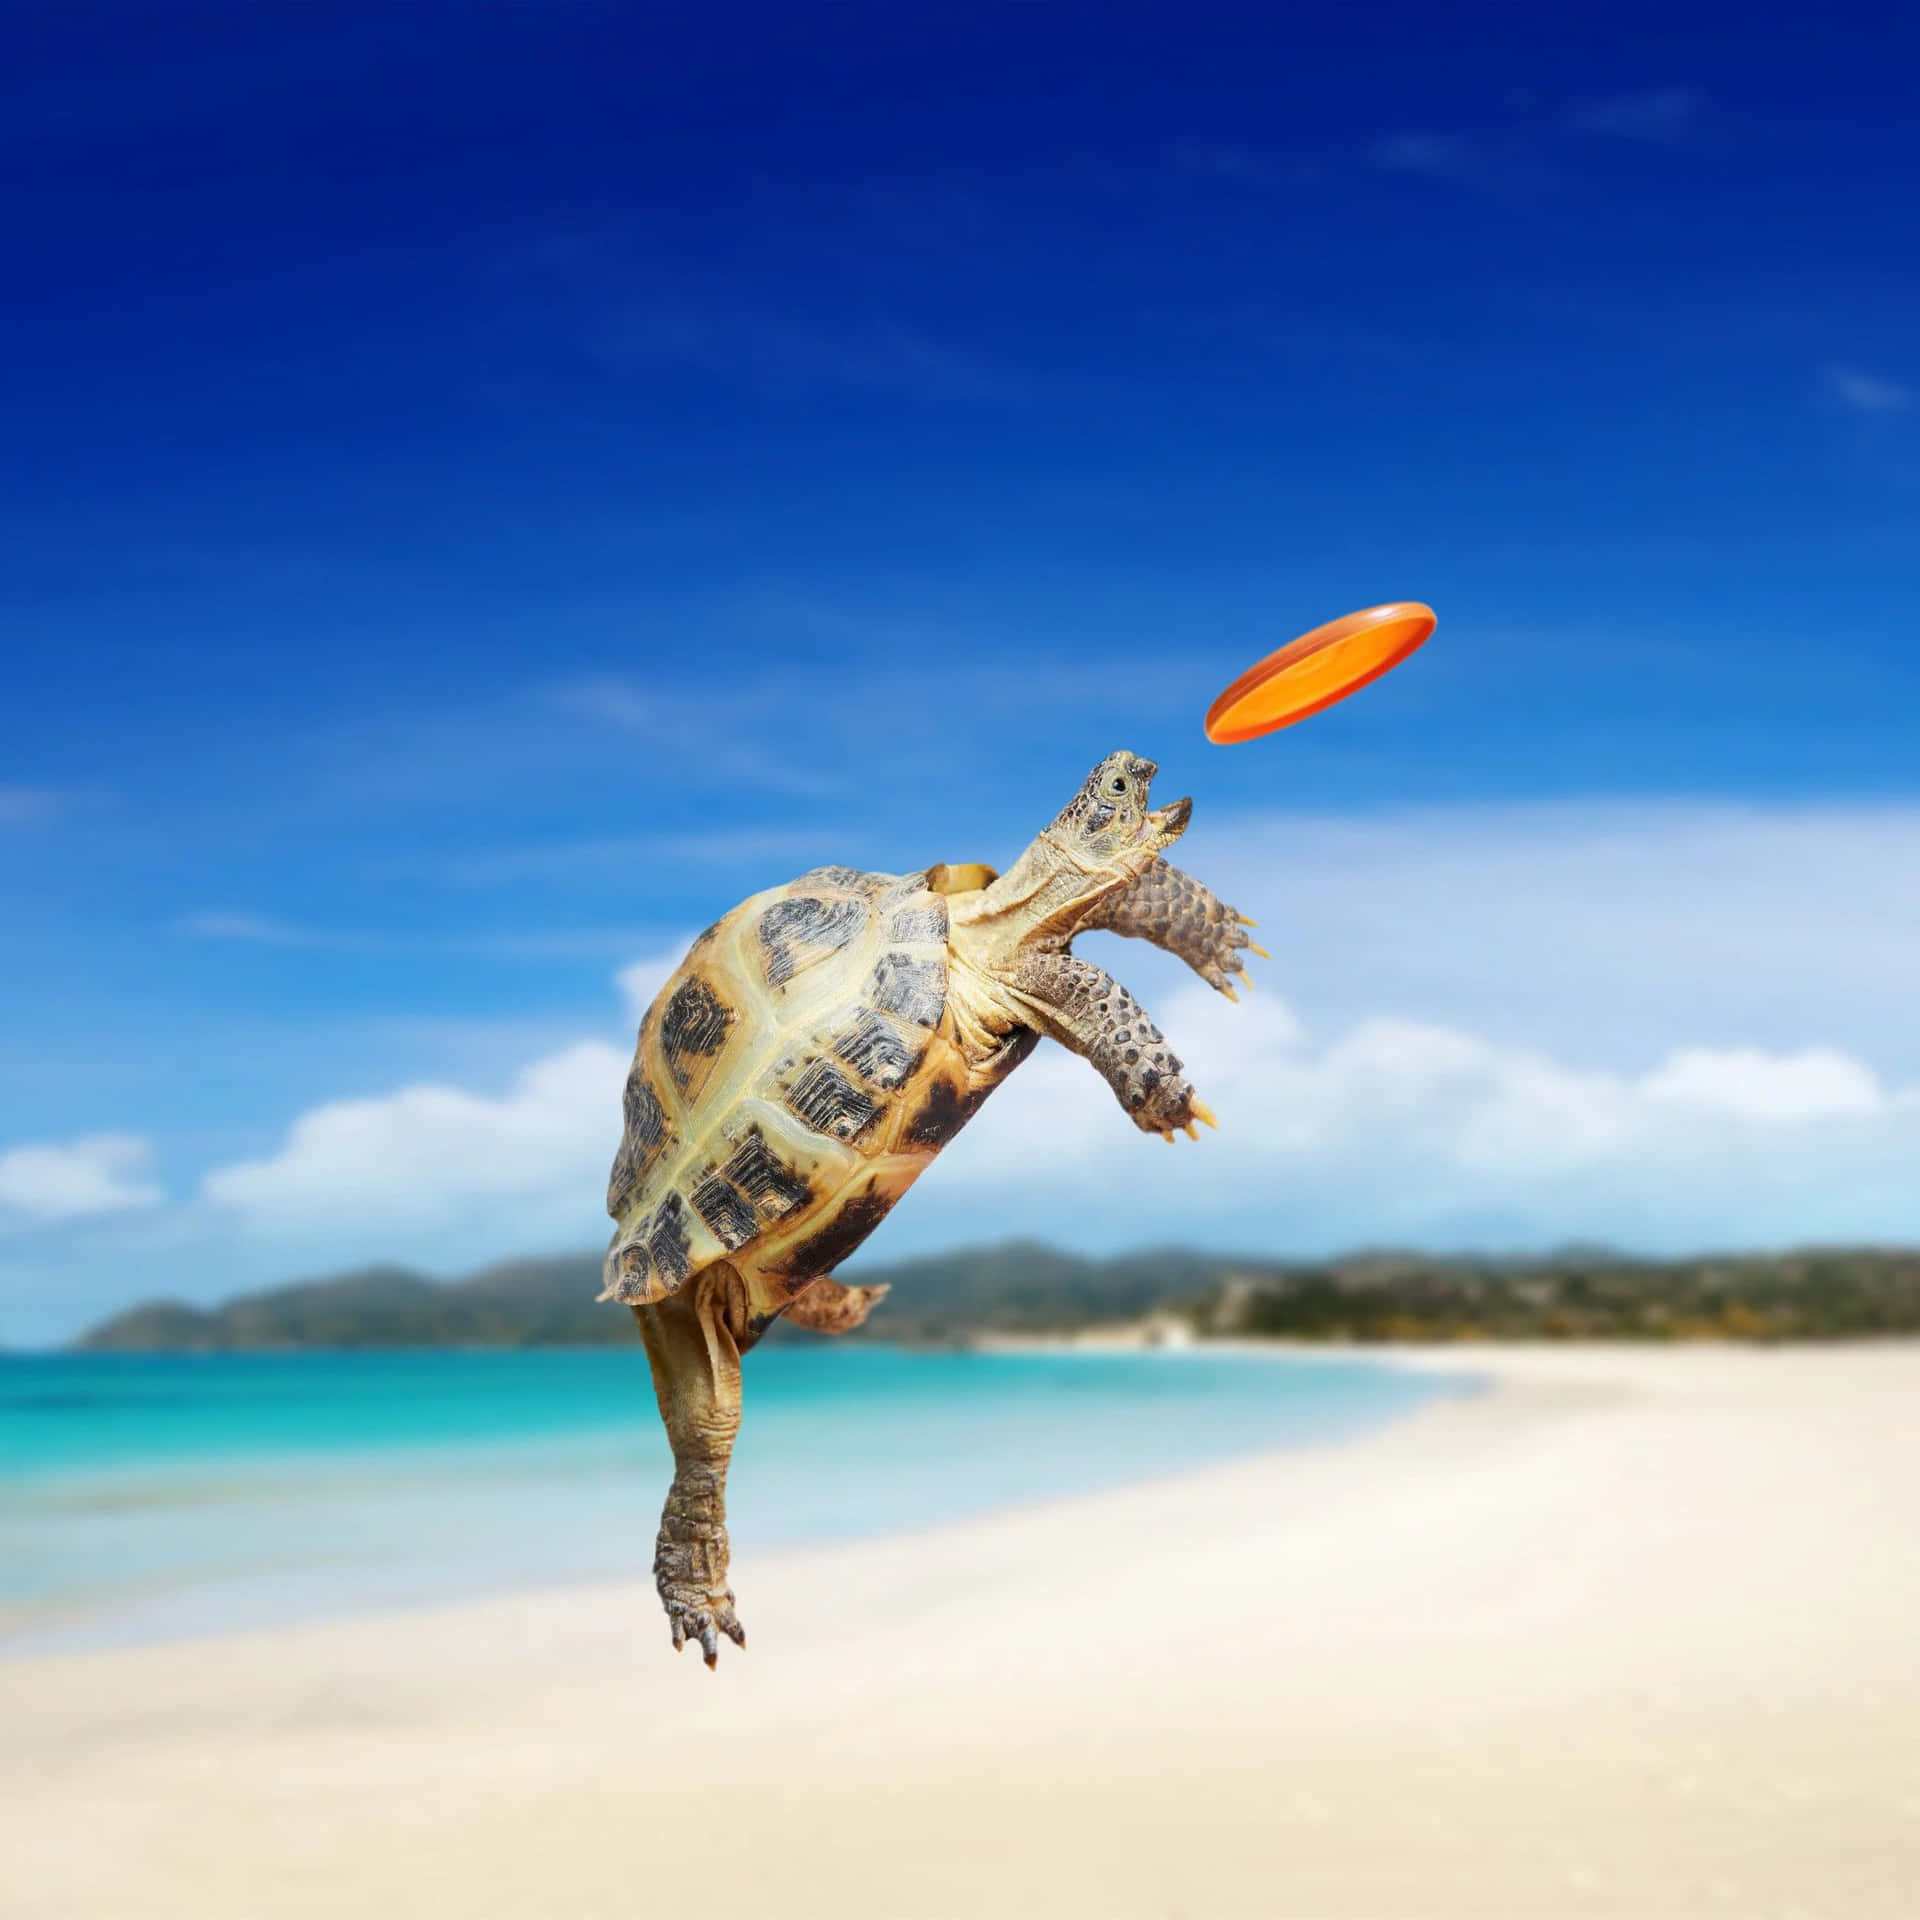 Adorable baby turtle enjoying a sunny day Wallpaper